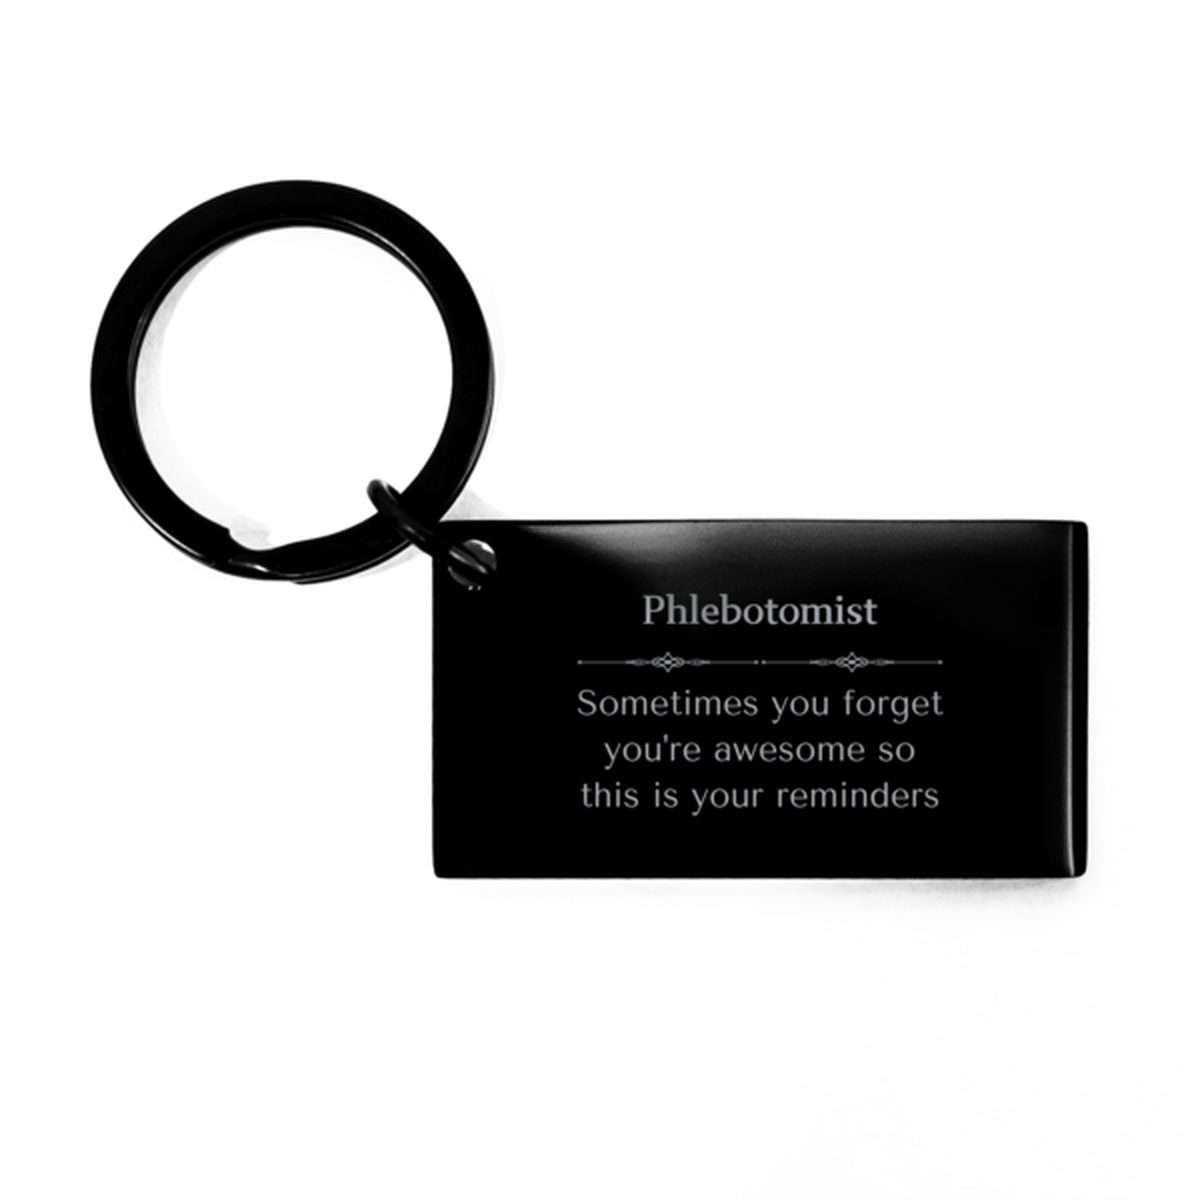 Sentimental Phlebotomist Keychain, Sailor Sometimes you forget you're awesome so this is your reminders, Graduation Christmas Birthday Gifts for Phlebotomist, Men, Women, Coworkers